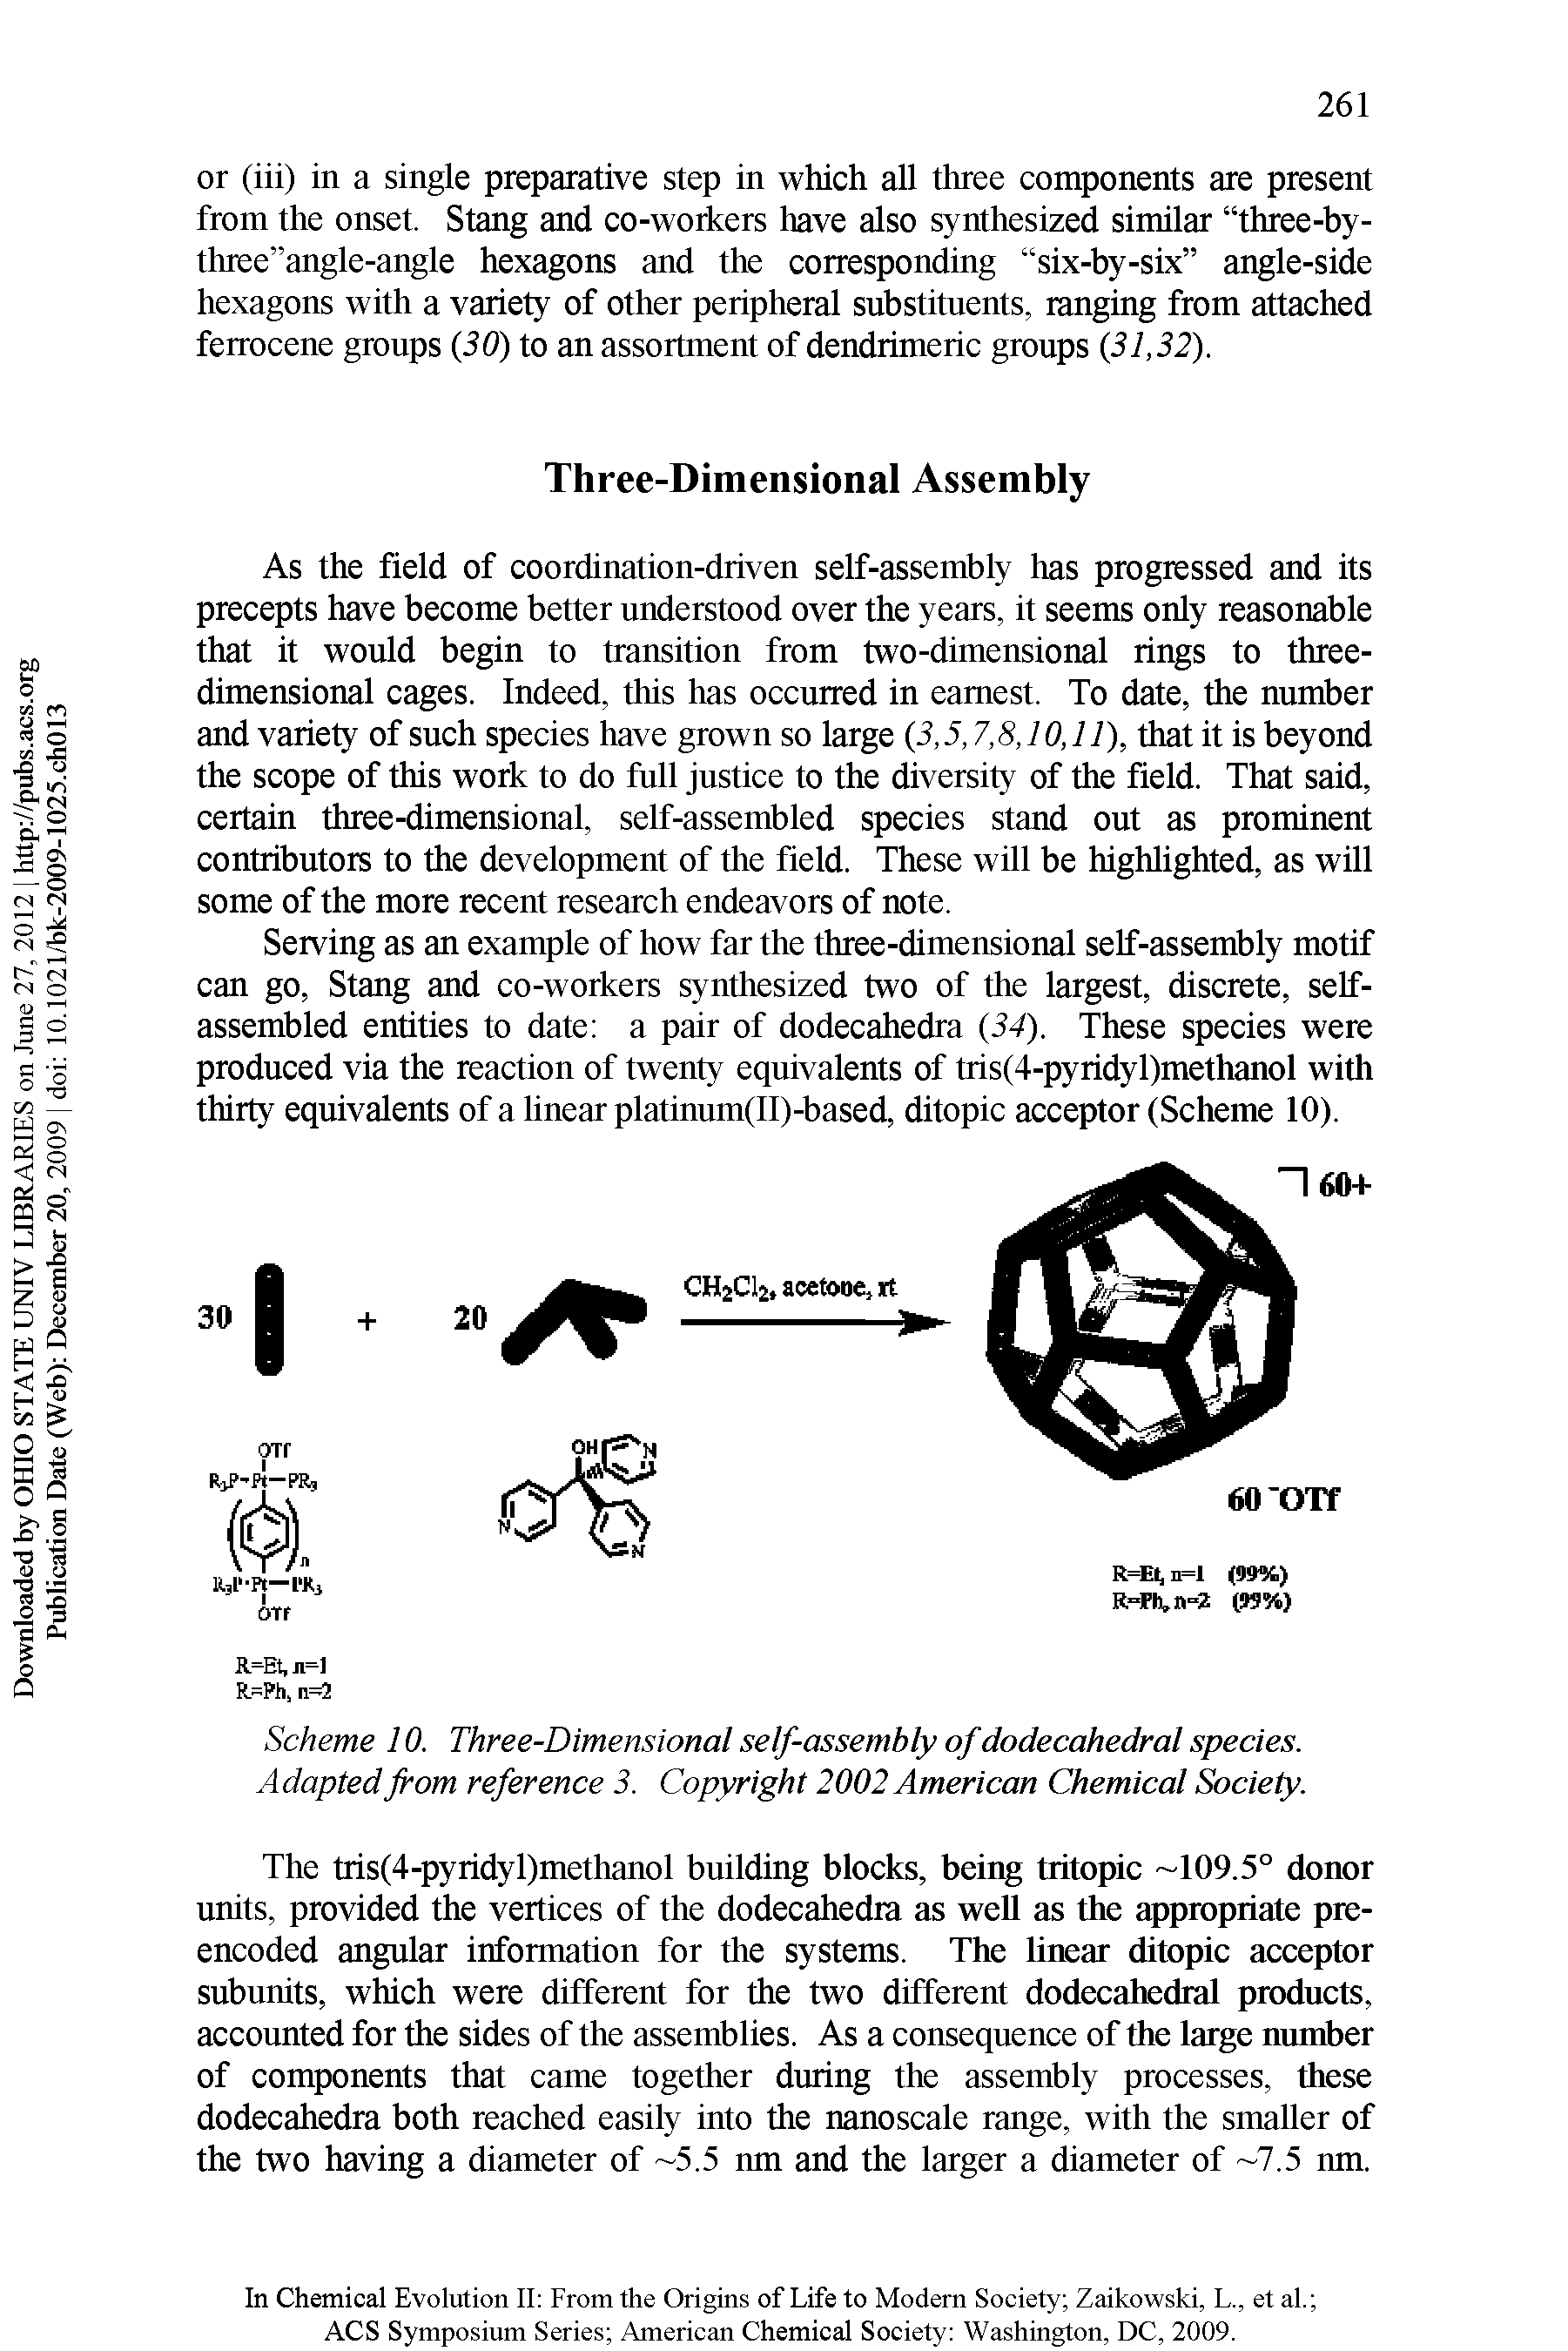 Scheme 10. Three-Dimensional self-assembly of dodecahedral species.